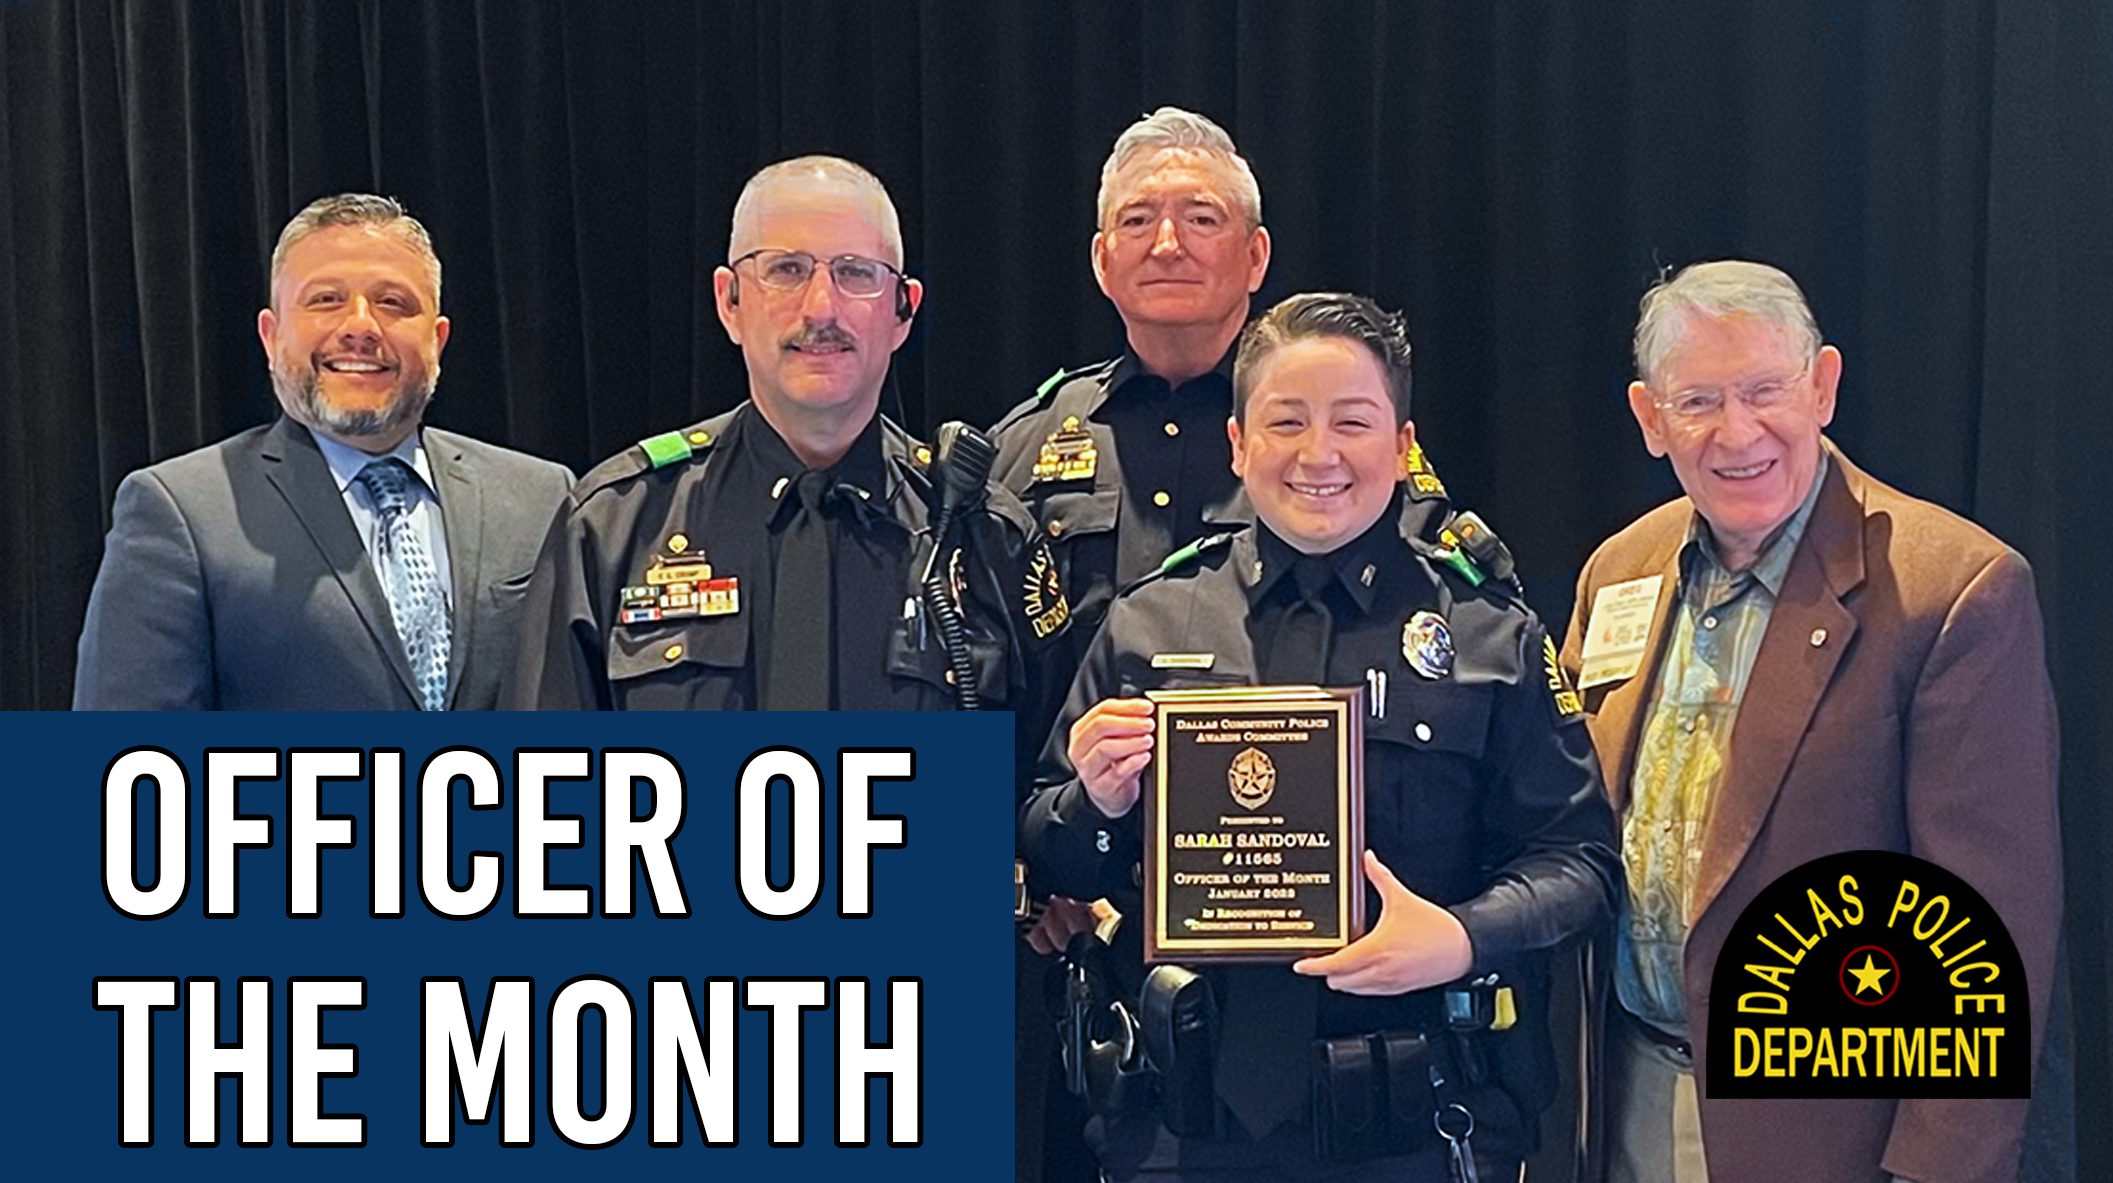 Sarah Sandoval Named the Dallas Police Department Officer of The Month